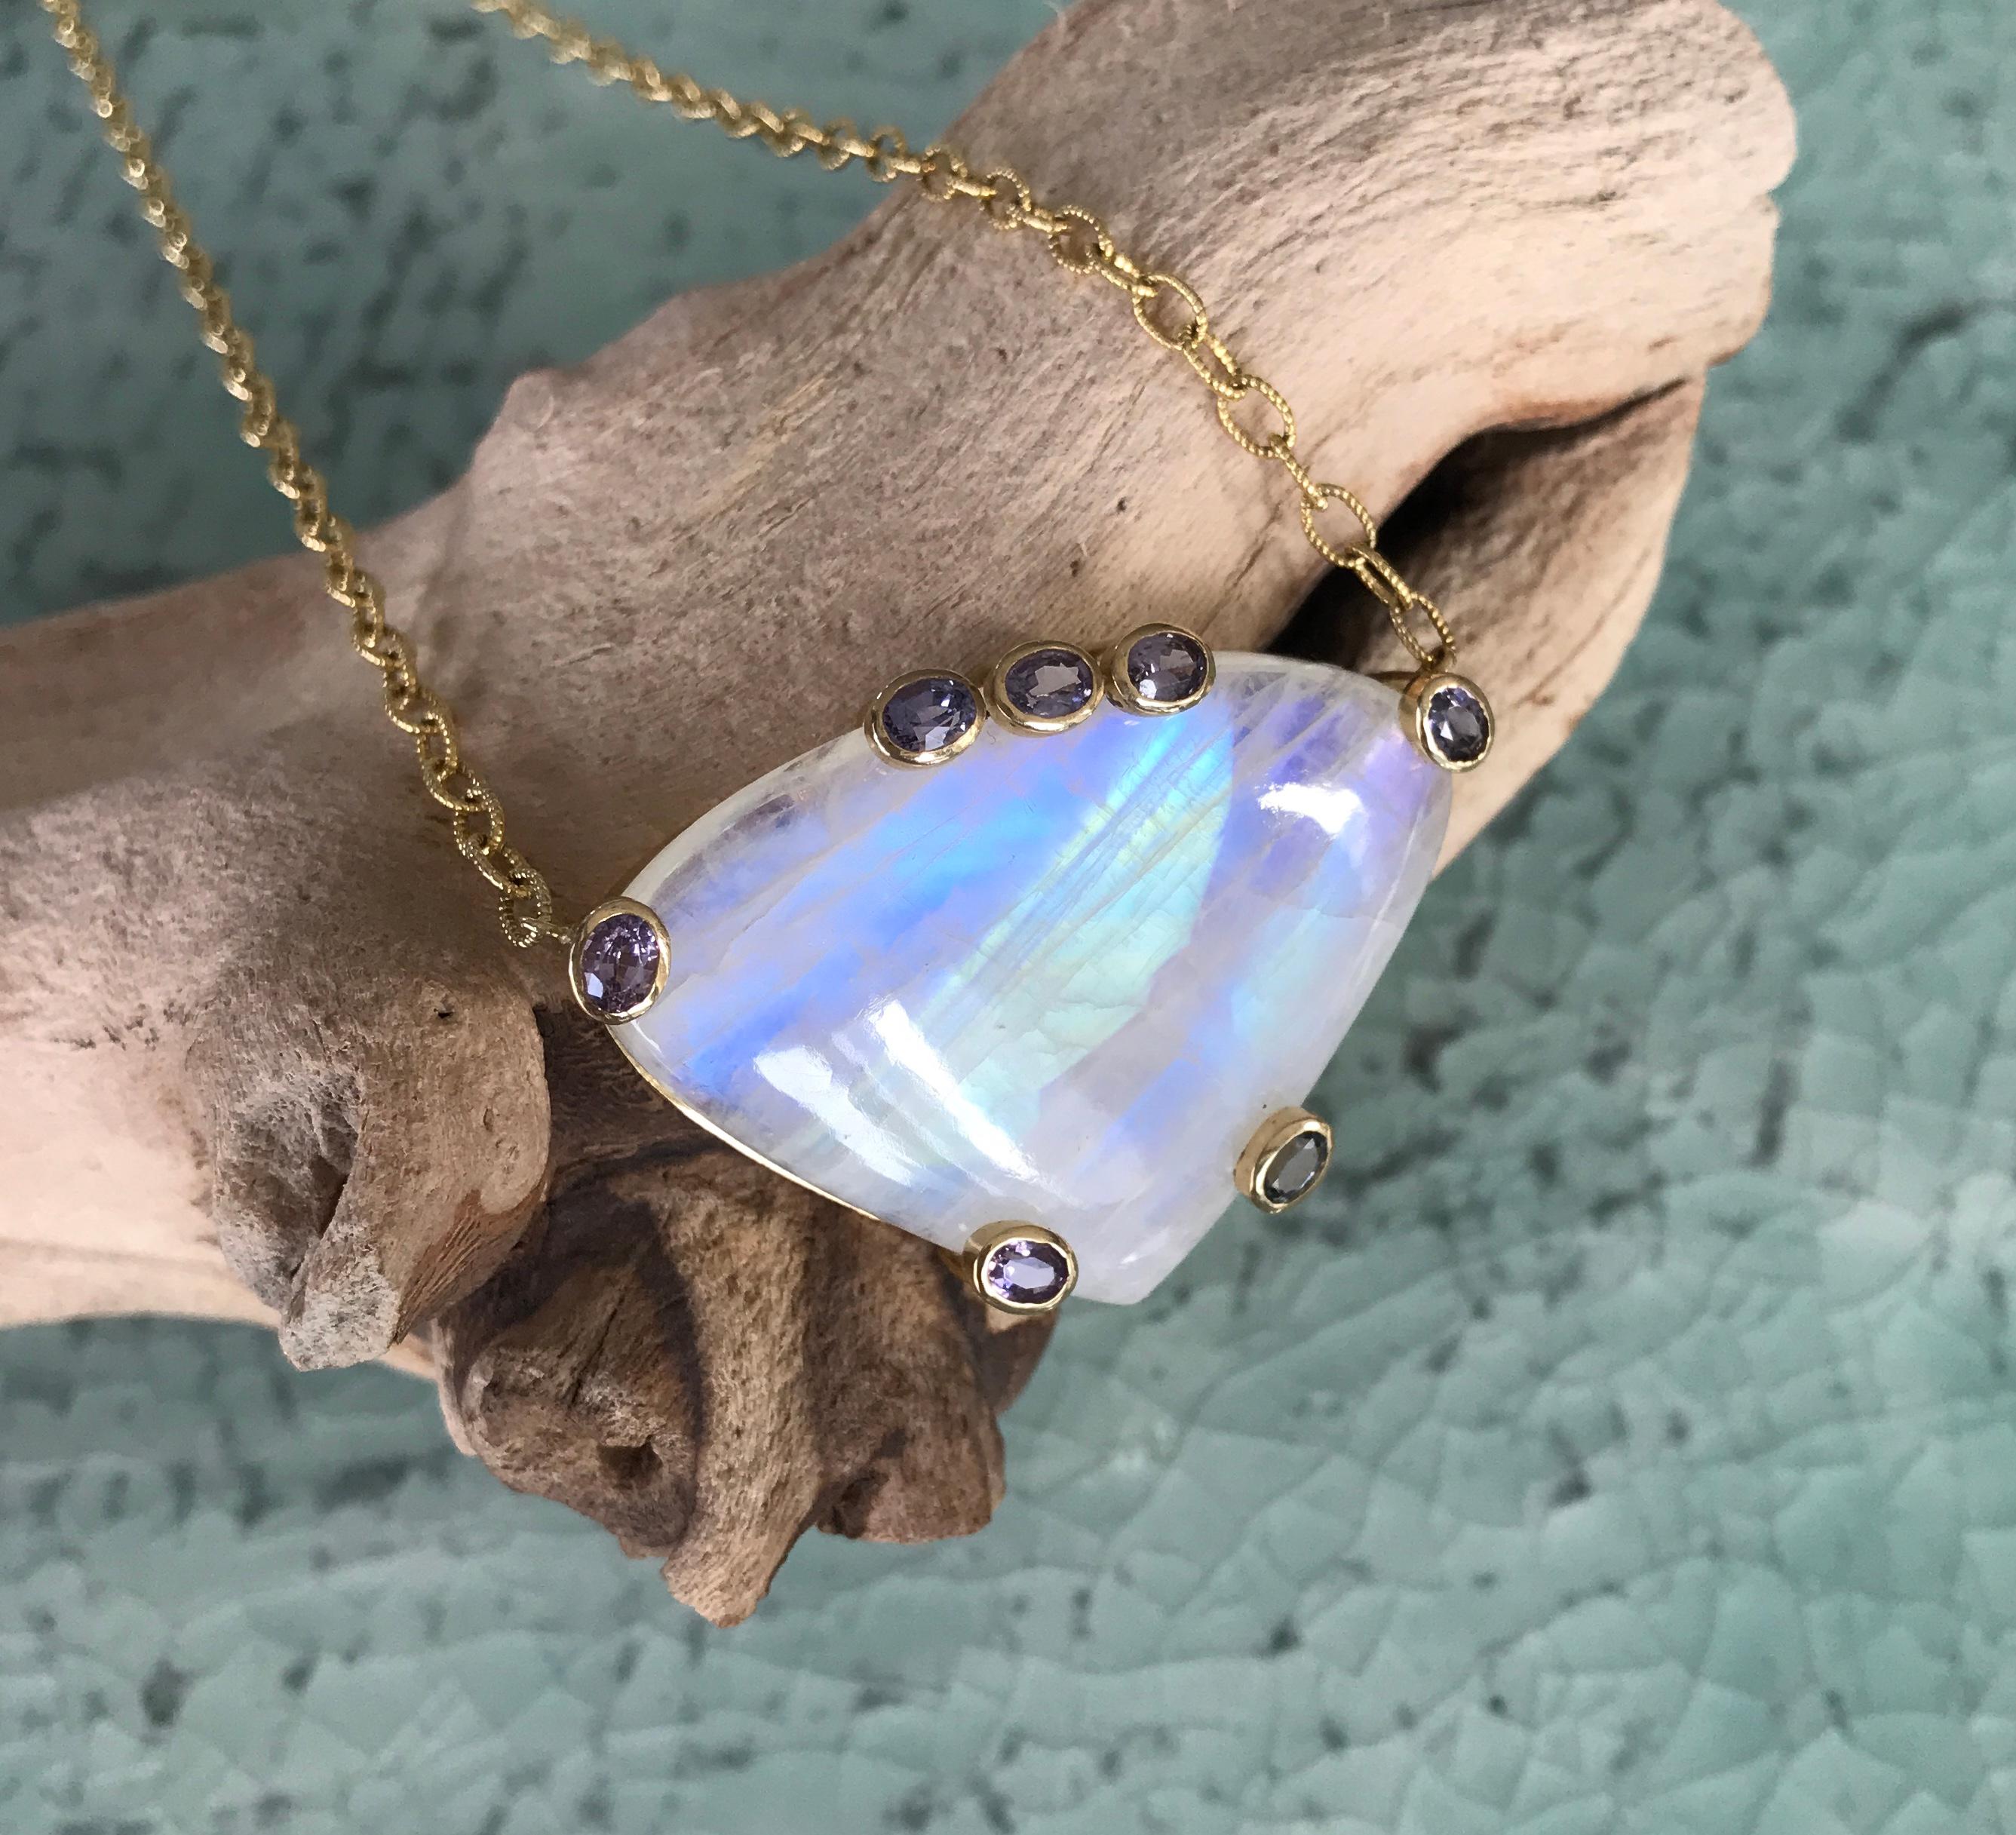 Fancy cut cabochon rainbow moonstone pendant, almost 2 inches across, with purple spinels, handcrafted in 18 karat yellow gold, and hanging on a 14 karat gold chain necklace. Total necklace length is 18 inches.

This one-of-a-kind rainbow moonstone